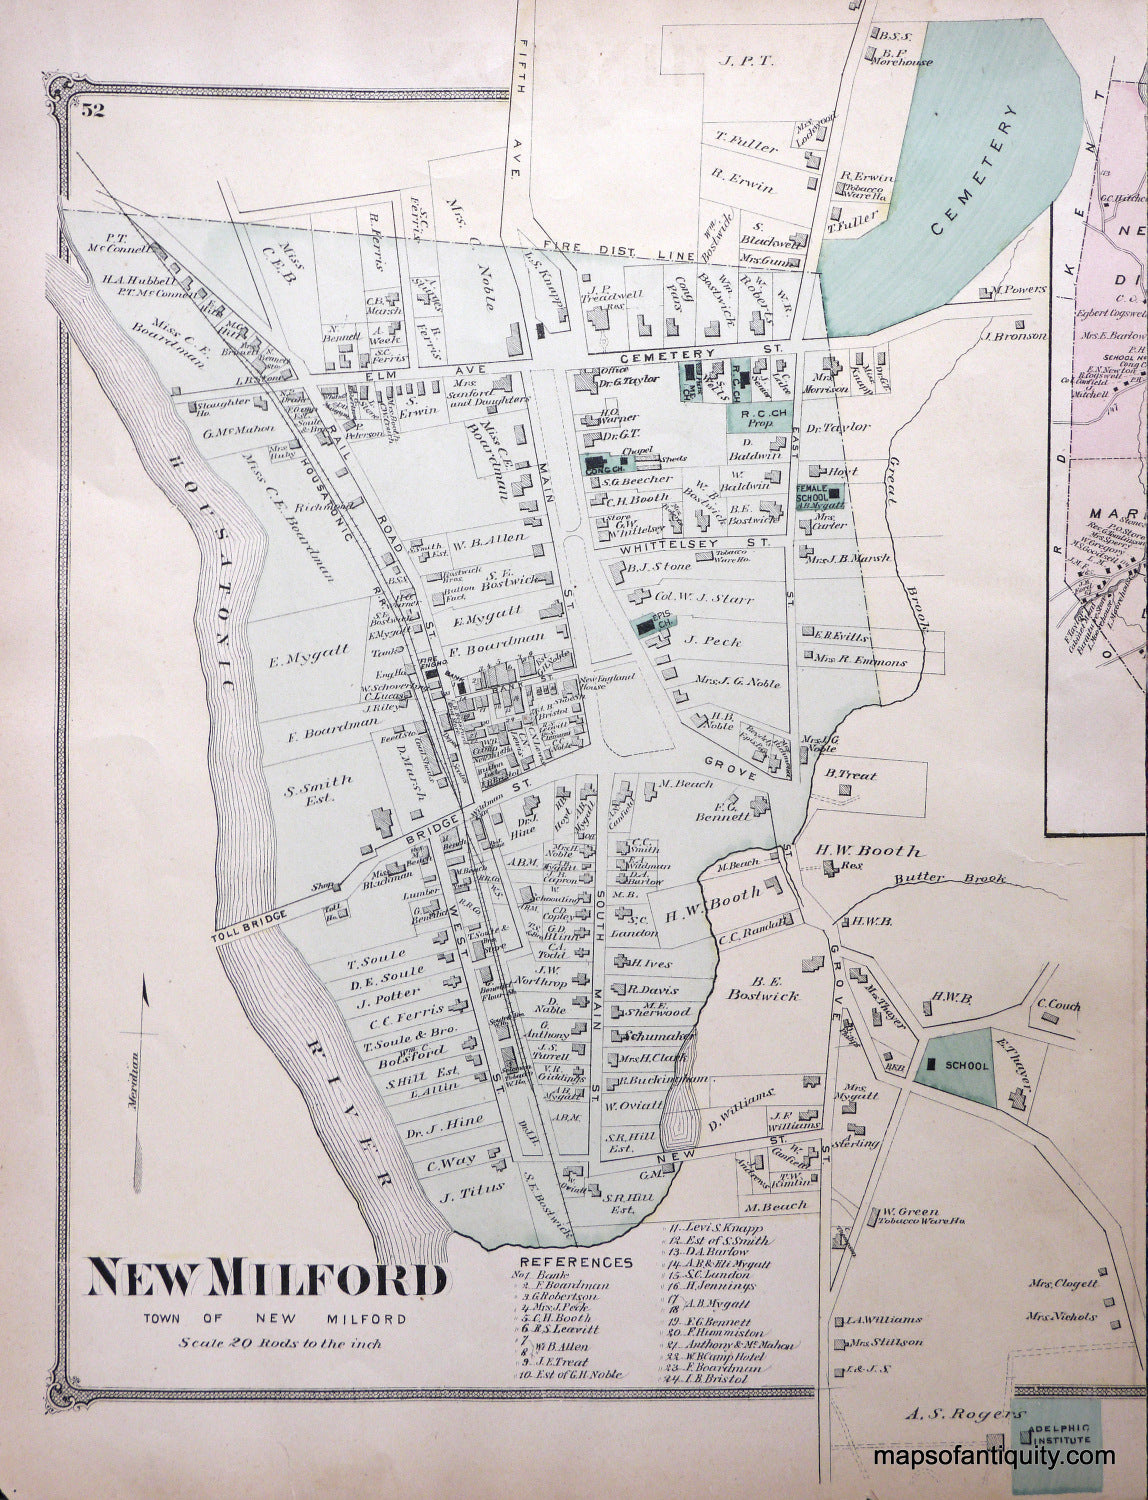 Antique-Hand-Colored-Map-New-Milford-Village-Connecticut-**********-United-States-Connecticut-1874-Beers-Maps-Of-Antiquity